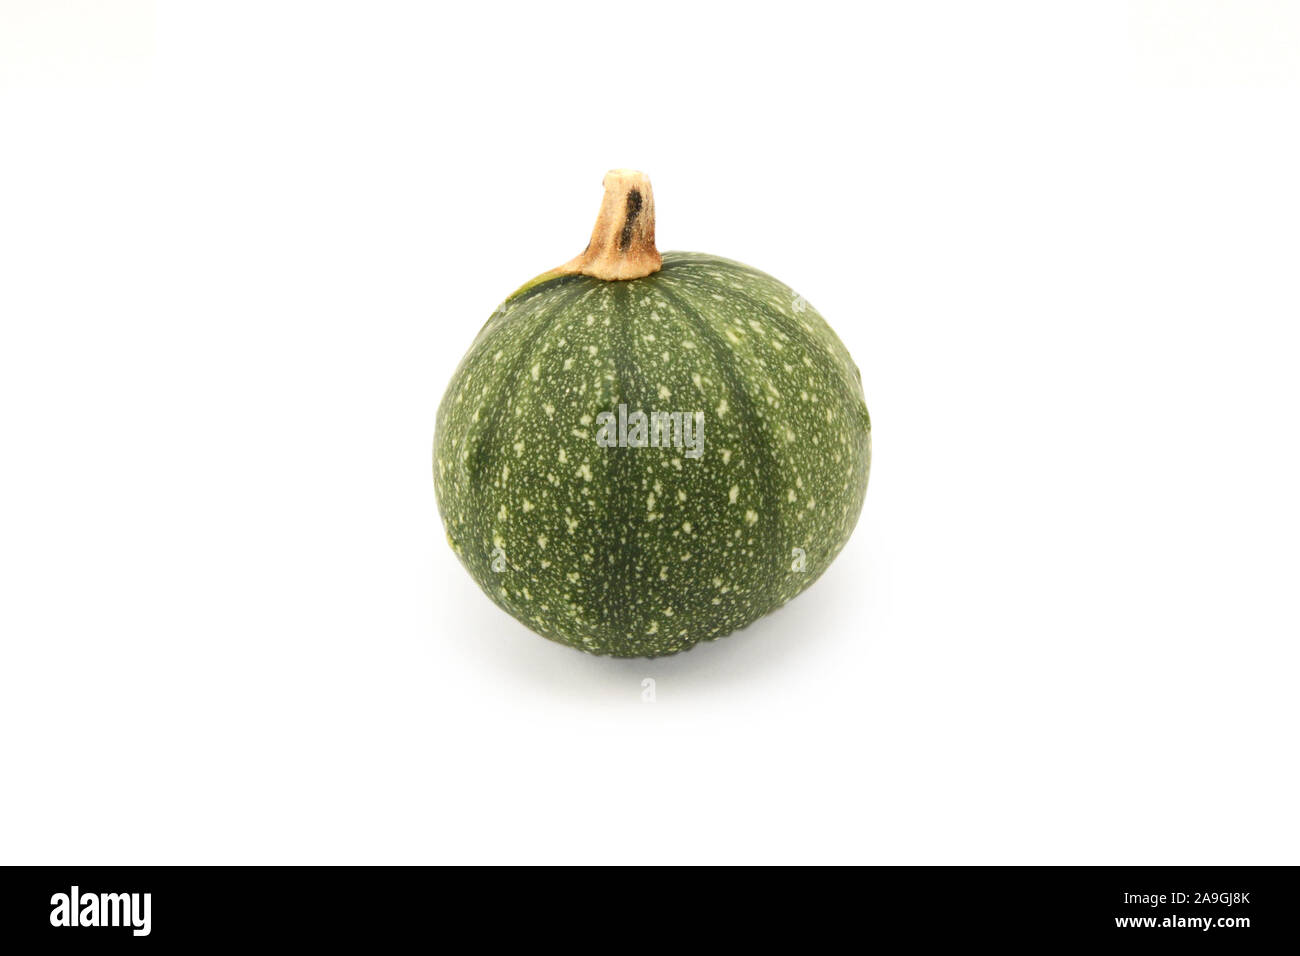 Small round ornamental gourd with green skin for decoration, on a white background Stock Photo